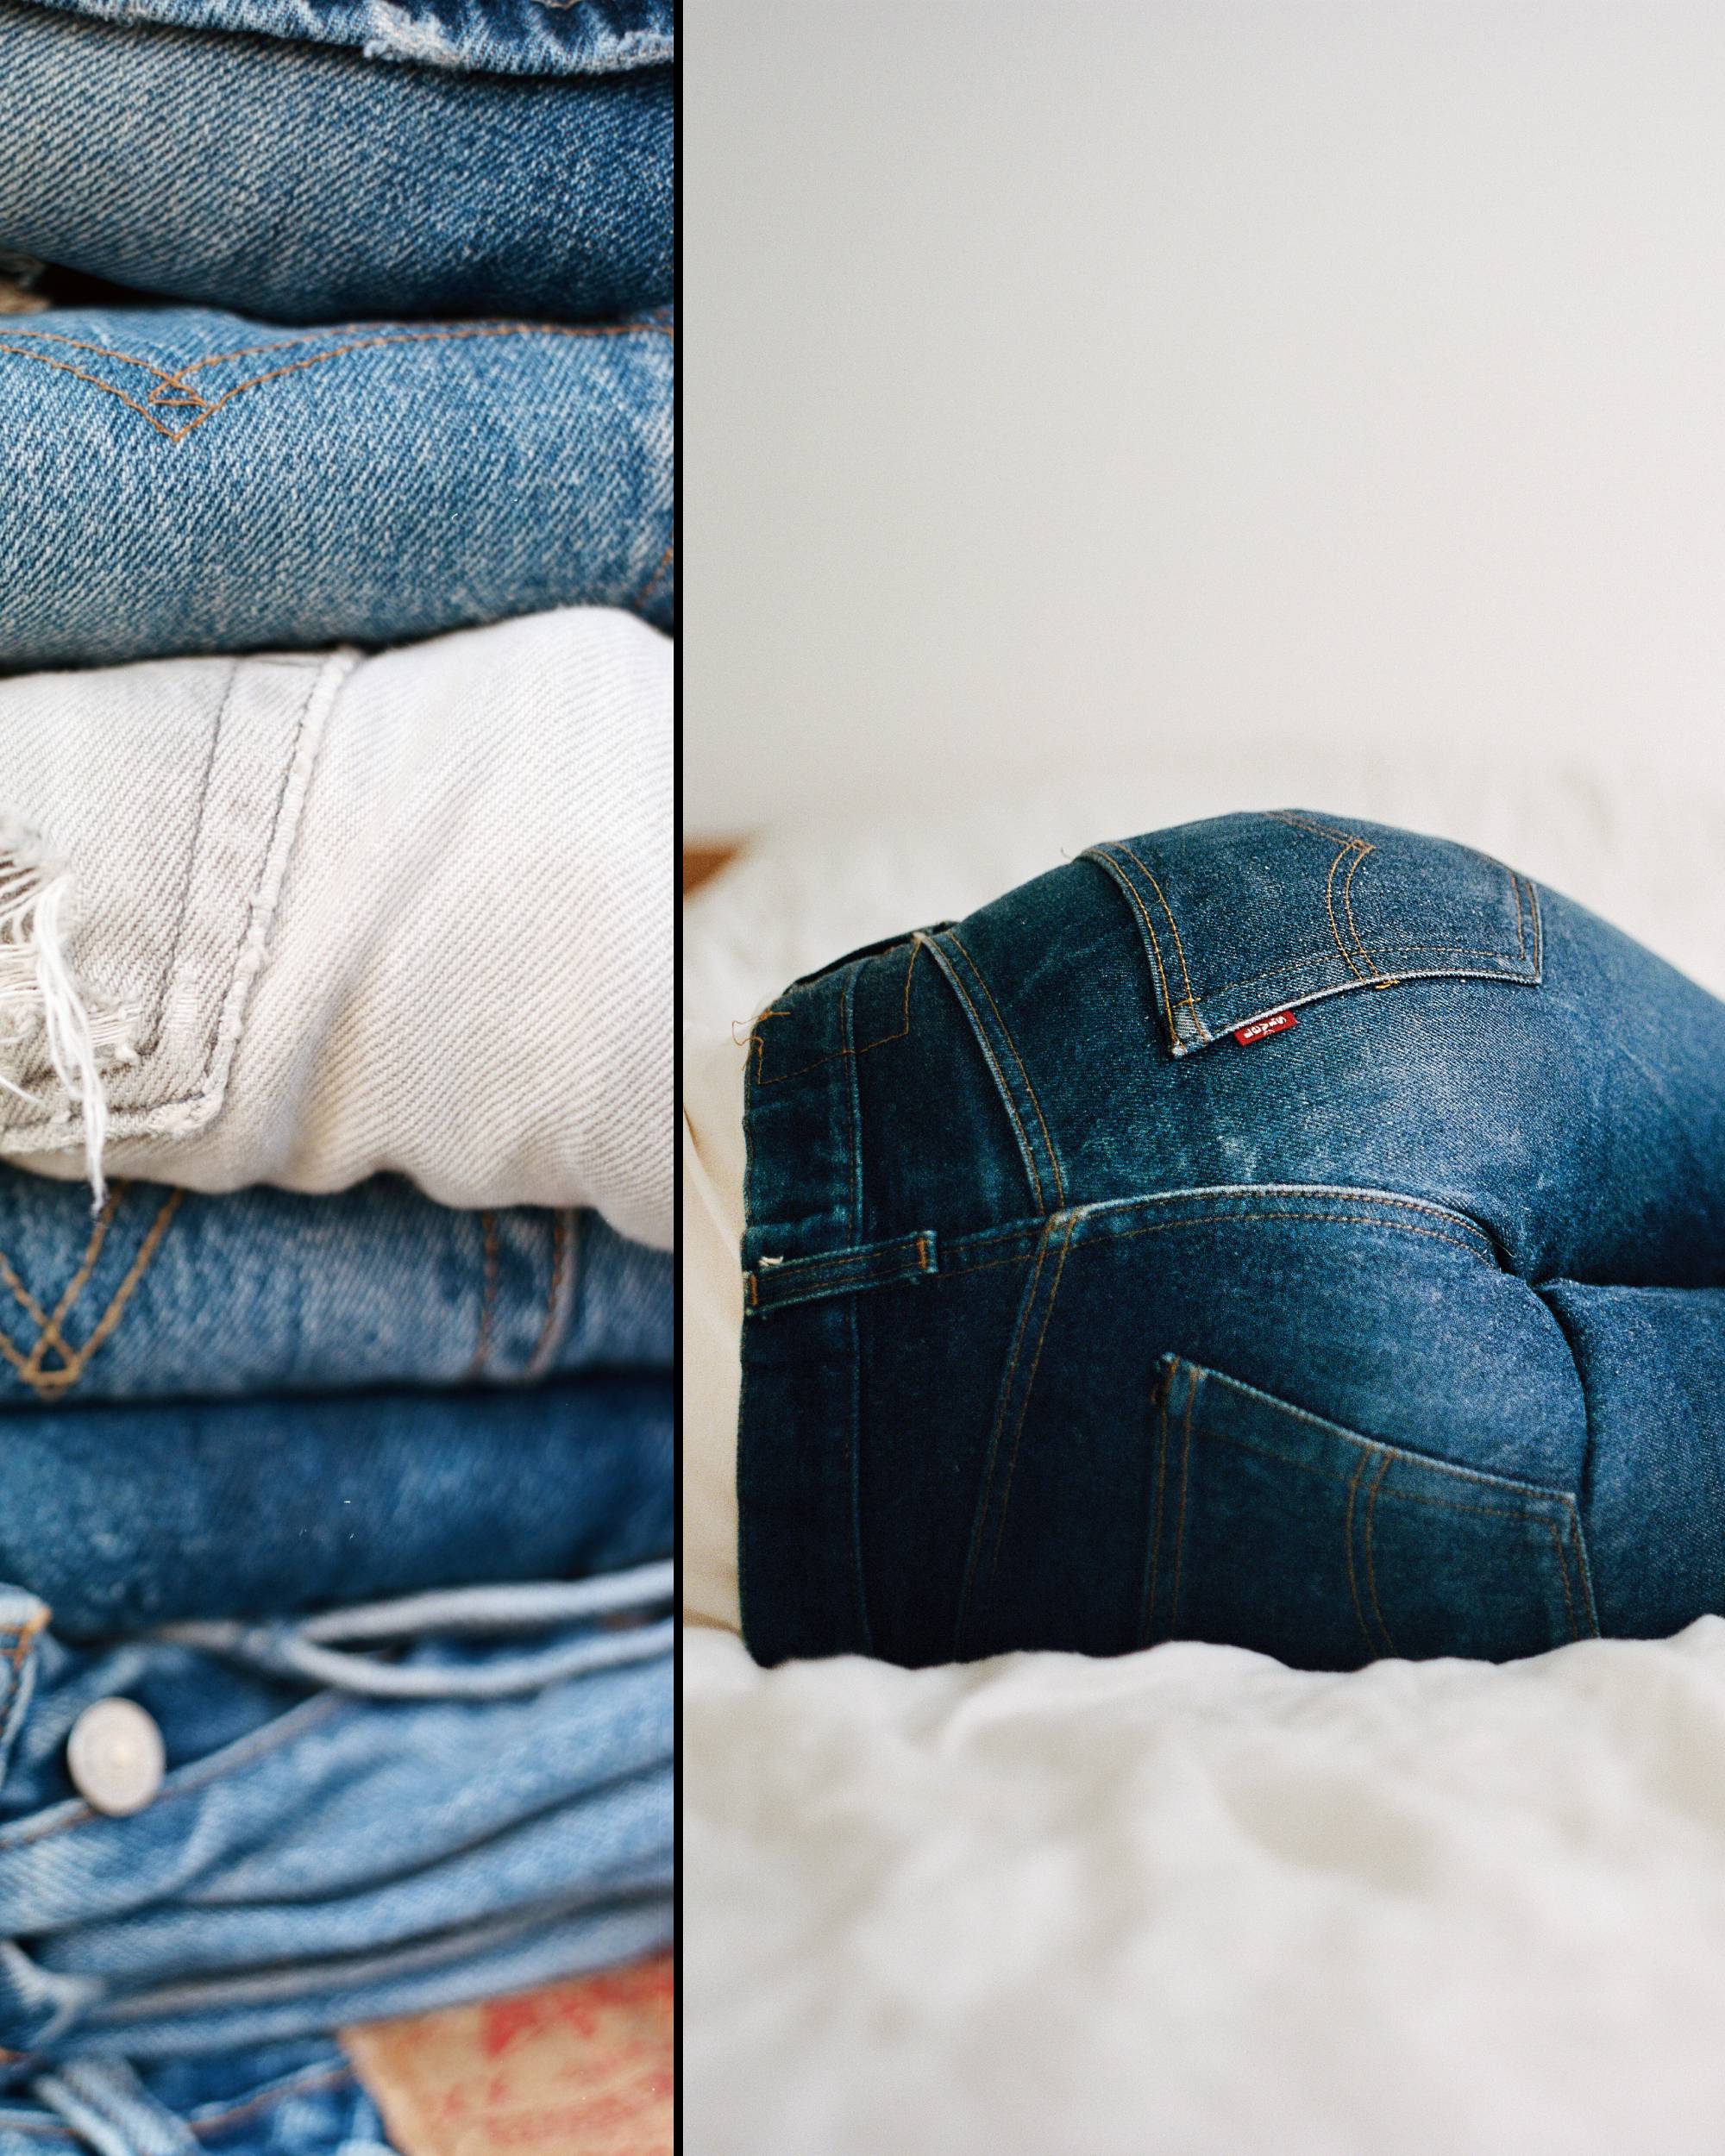 Image of a stack of jeans next to an image of a woman laying with a pair of Levi's jeans on.